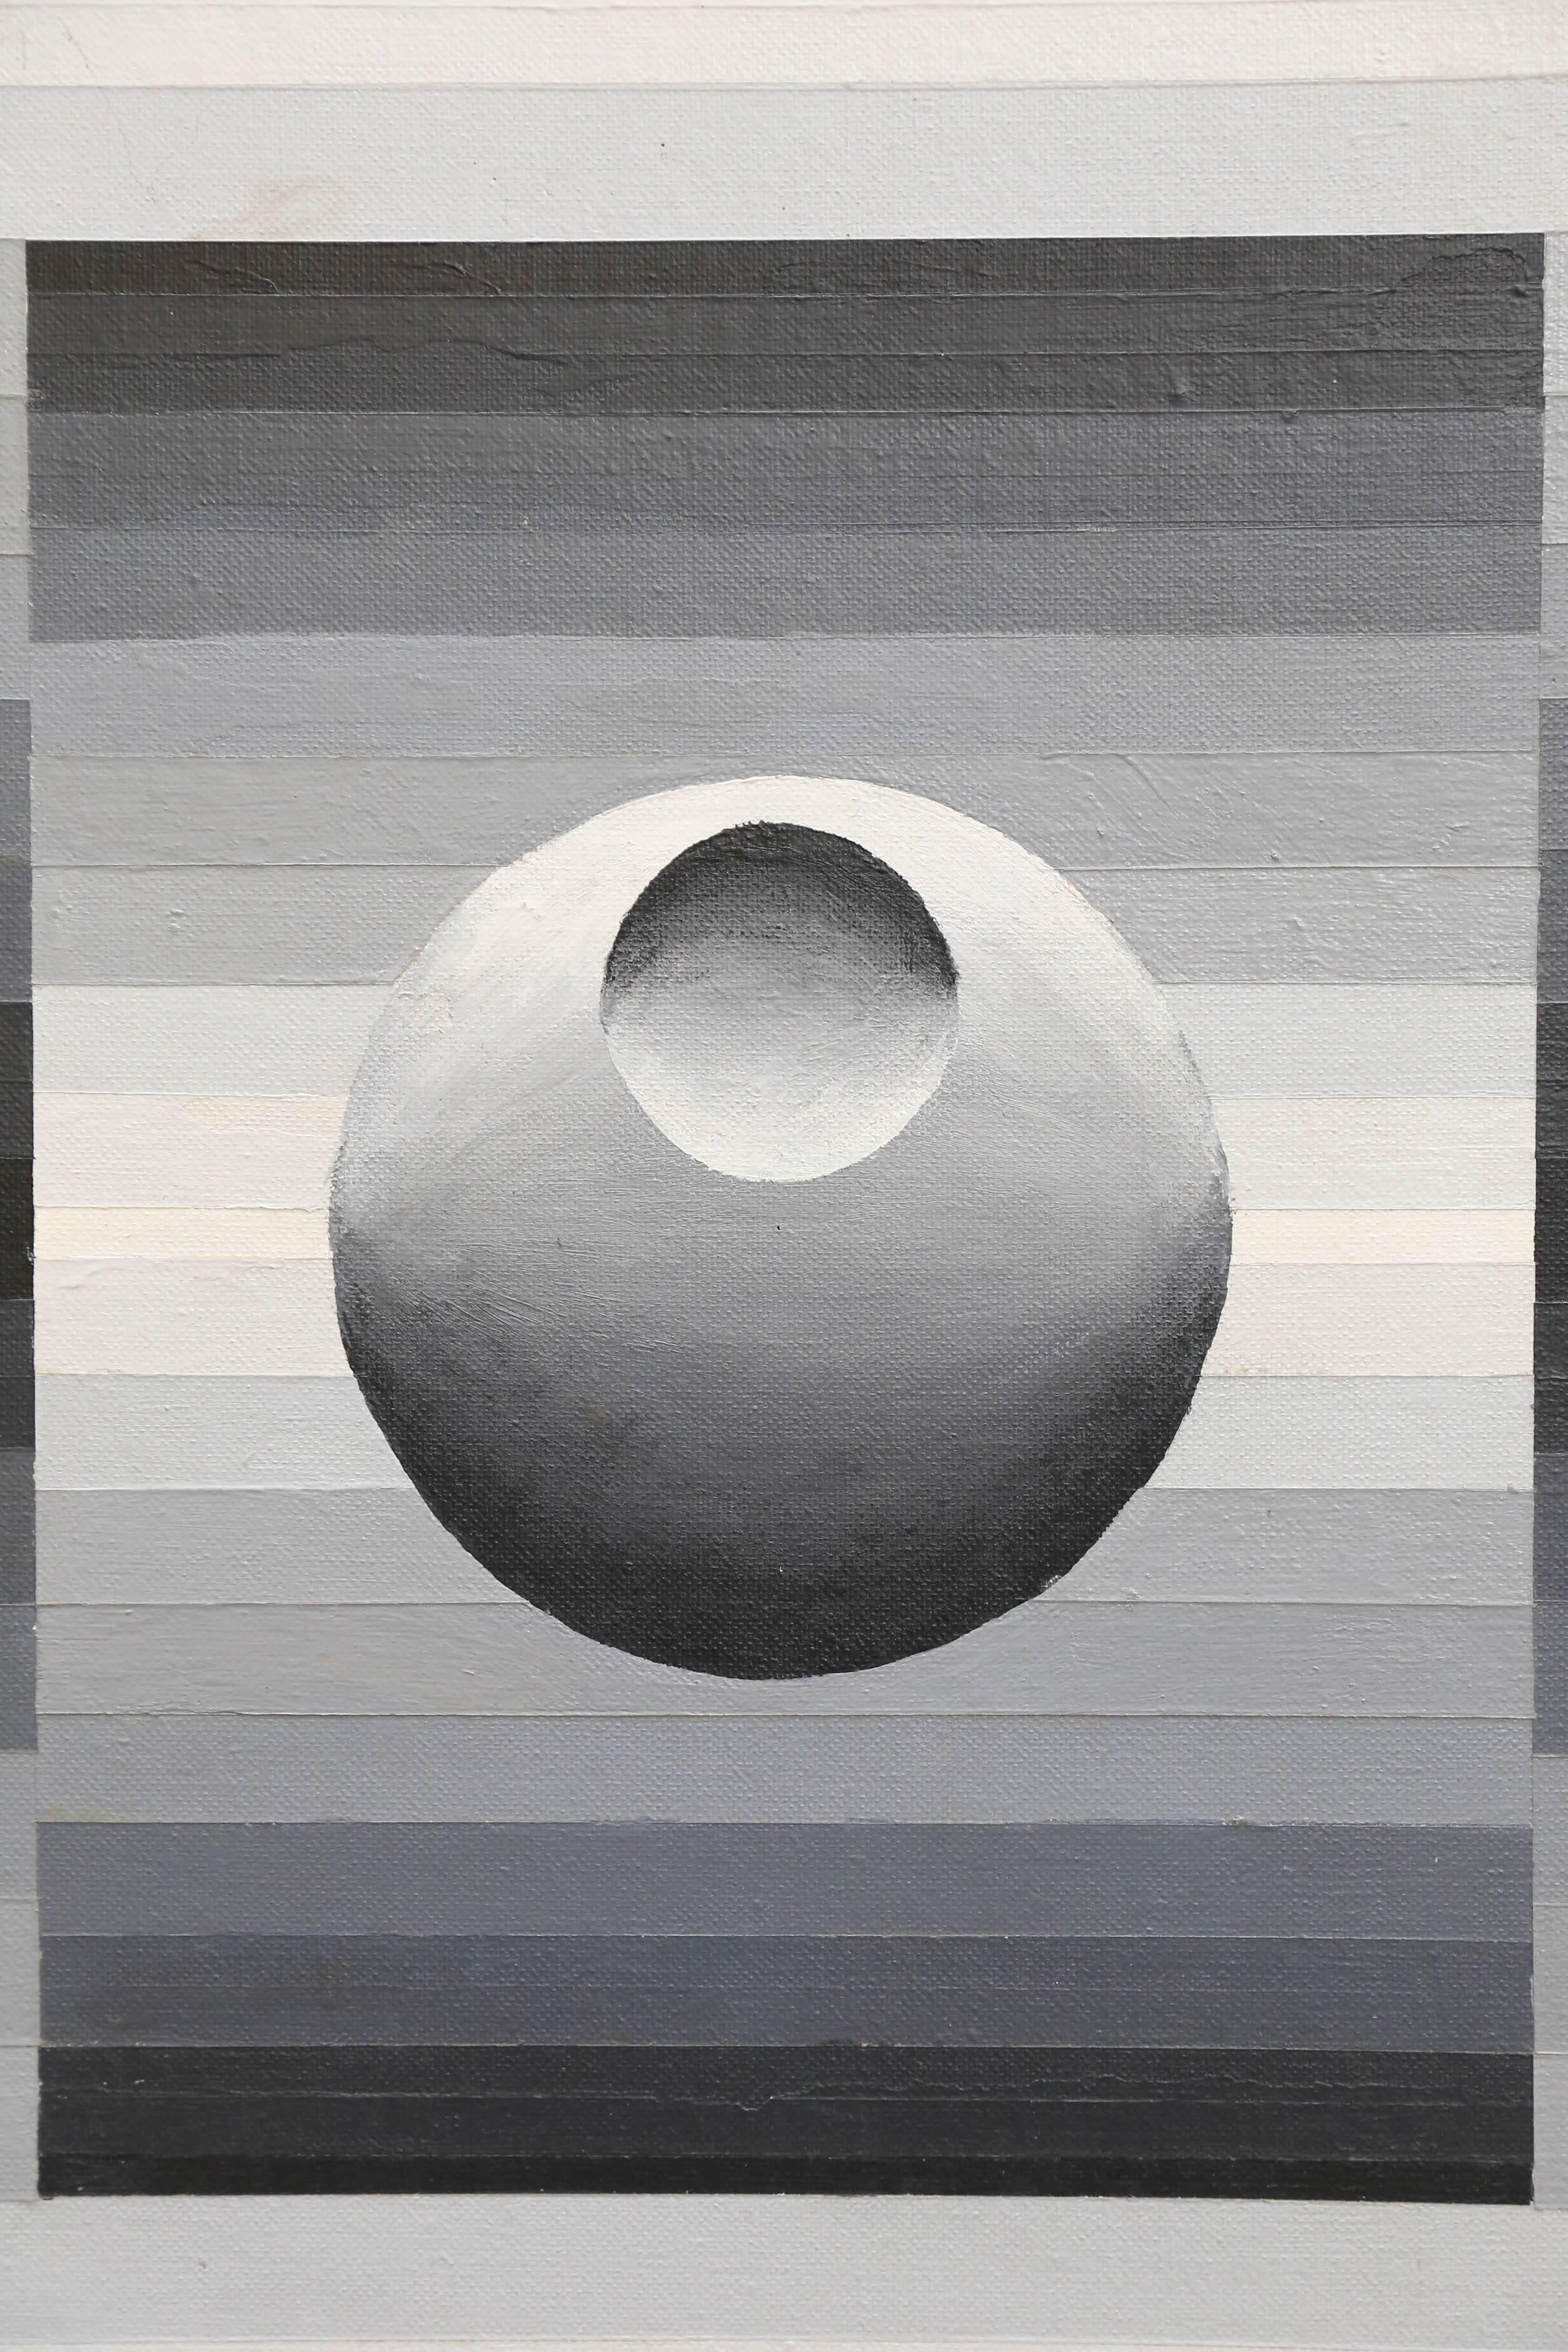 Laskowskie's gray on gray asymmetrical acrylic on canvas is a fine example of gradient panting. The back panel begins and ends with lightest color of gray meeting in the middle with the darkest. The middle panel is positioned using the exact